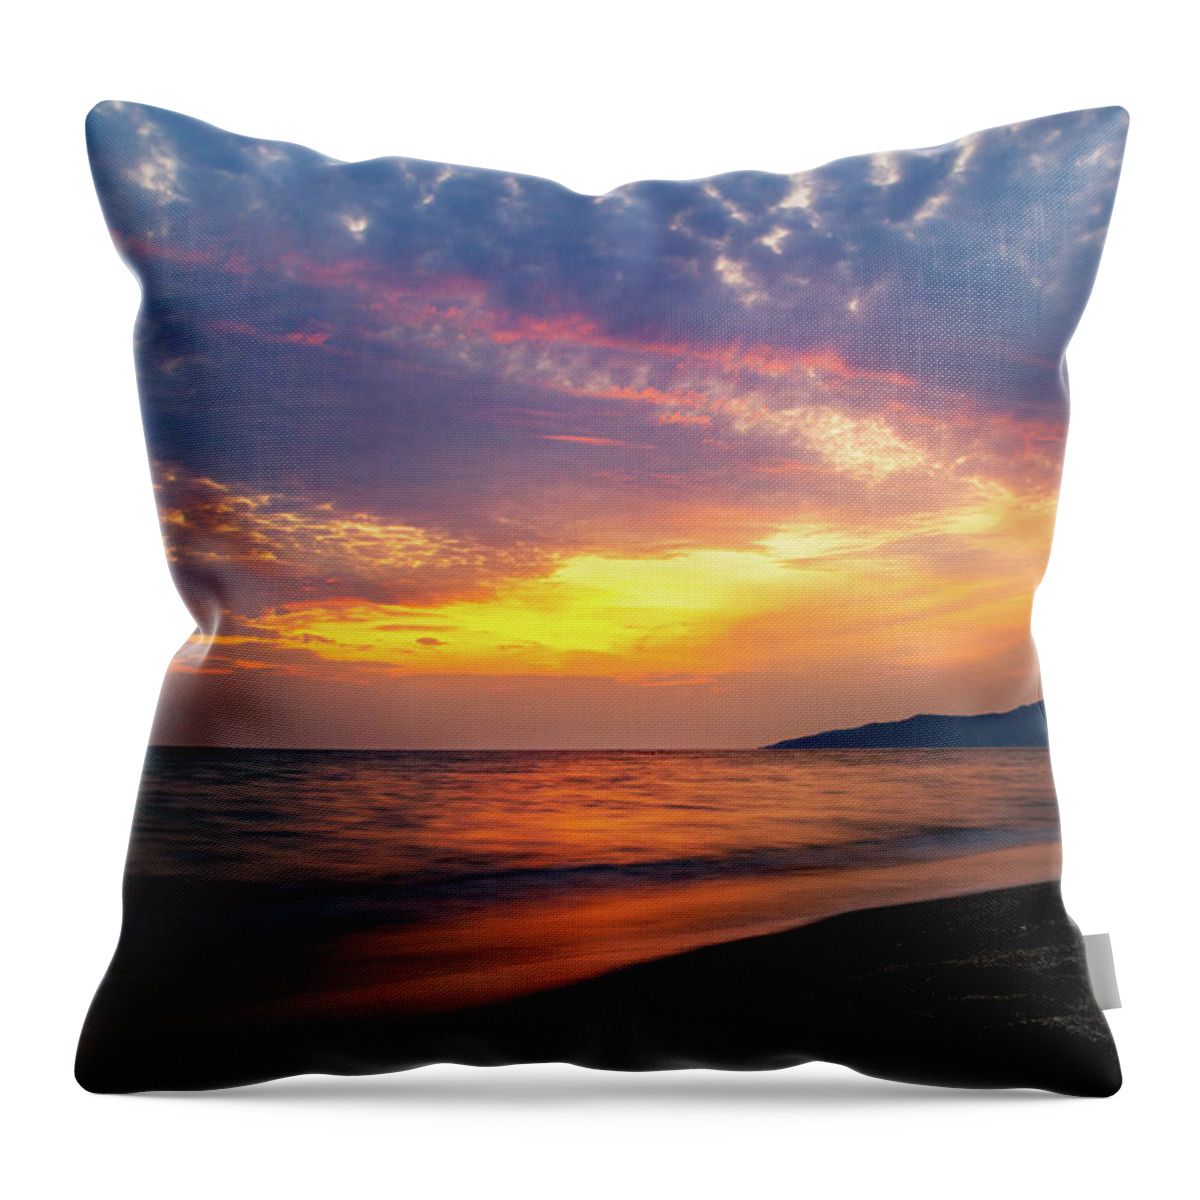 Sunset Throw Pillow featuring the photograph Sunset through Clouds by Umberto Barone